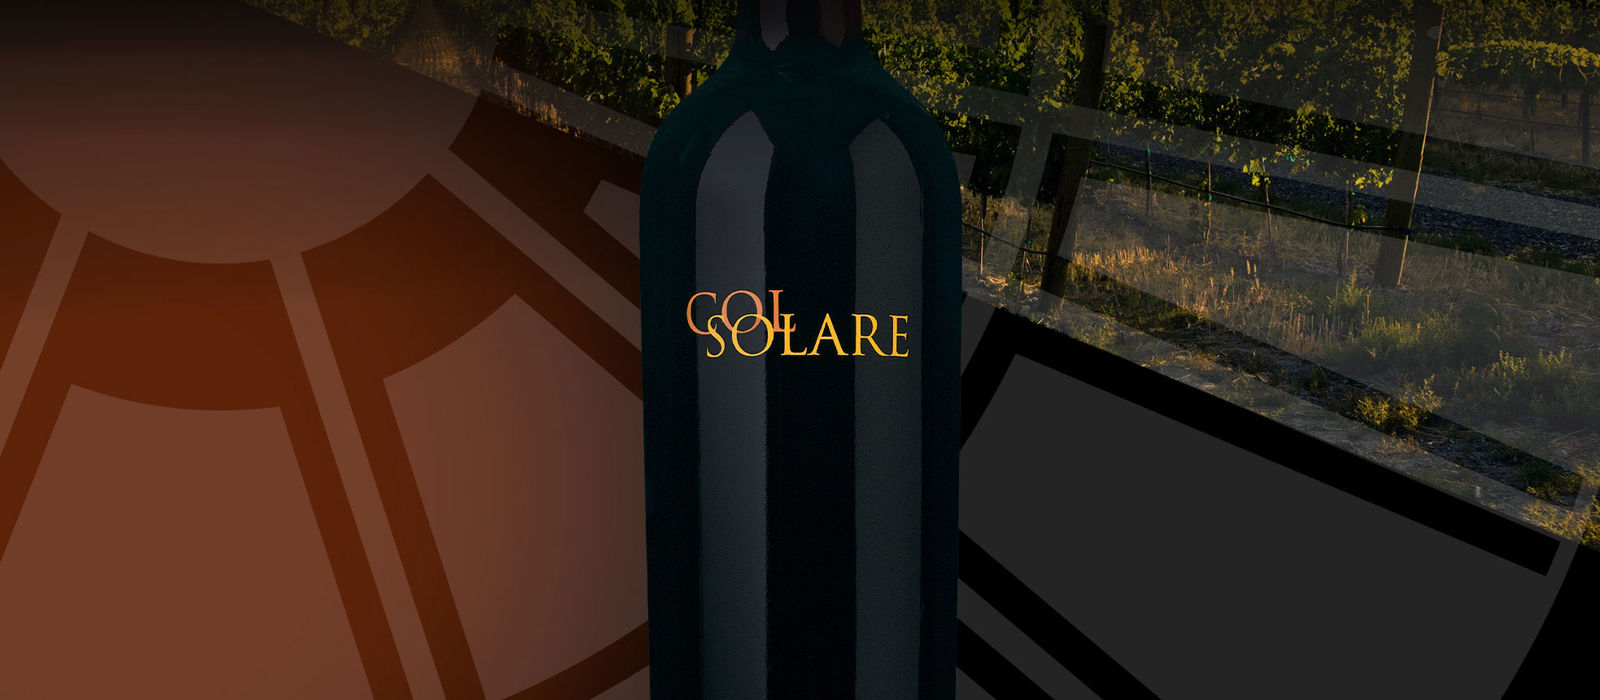 A bottle of Col Solare wine against a vineyard background